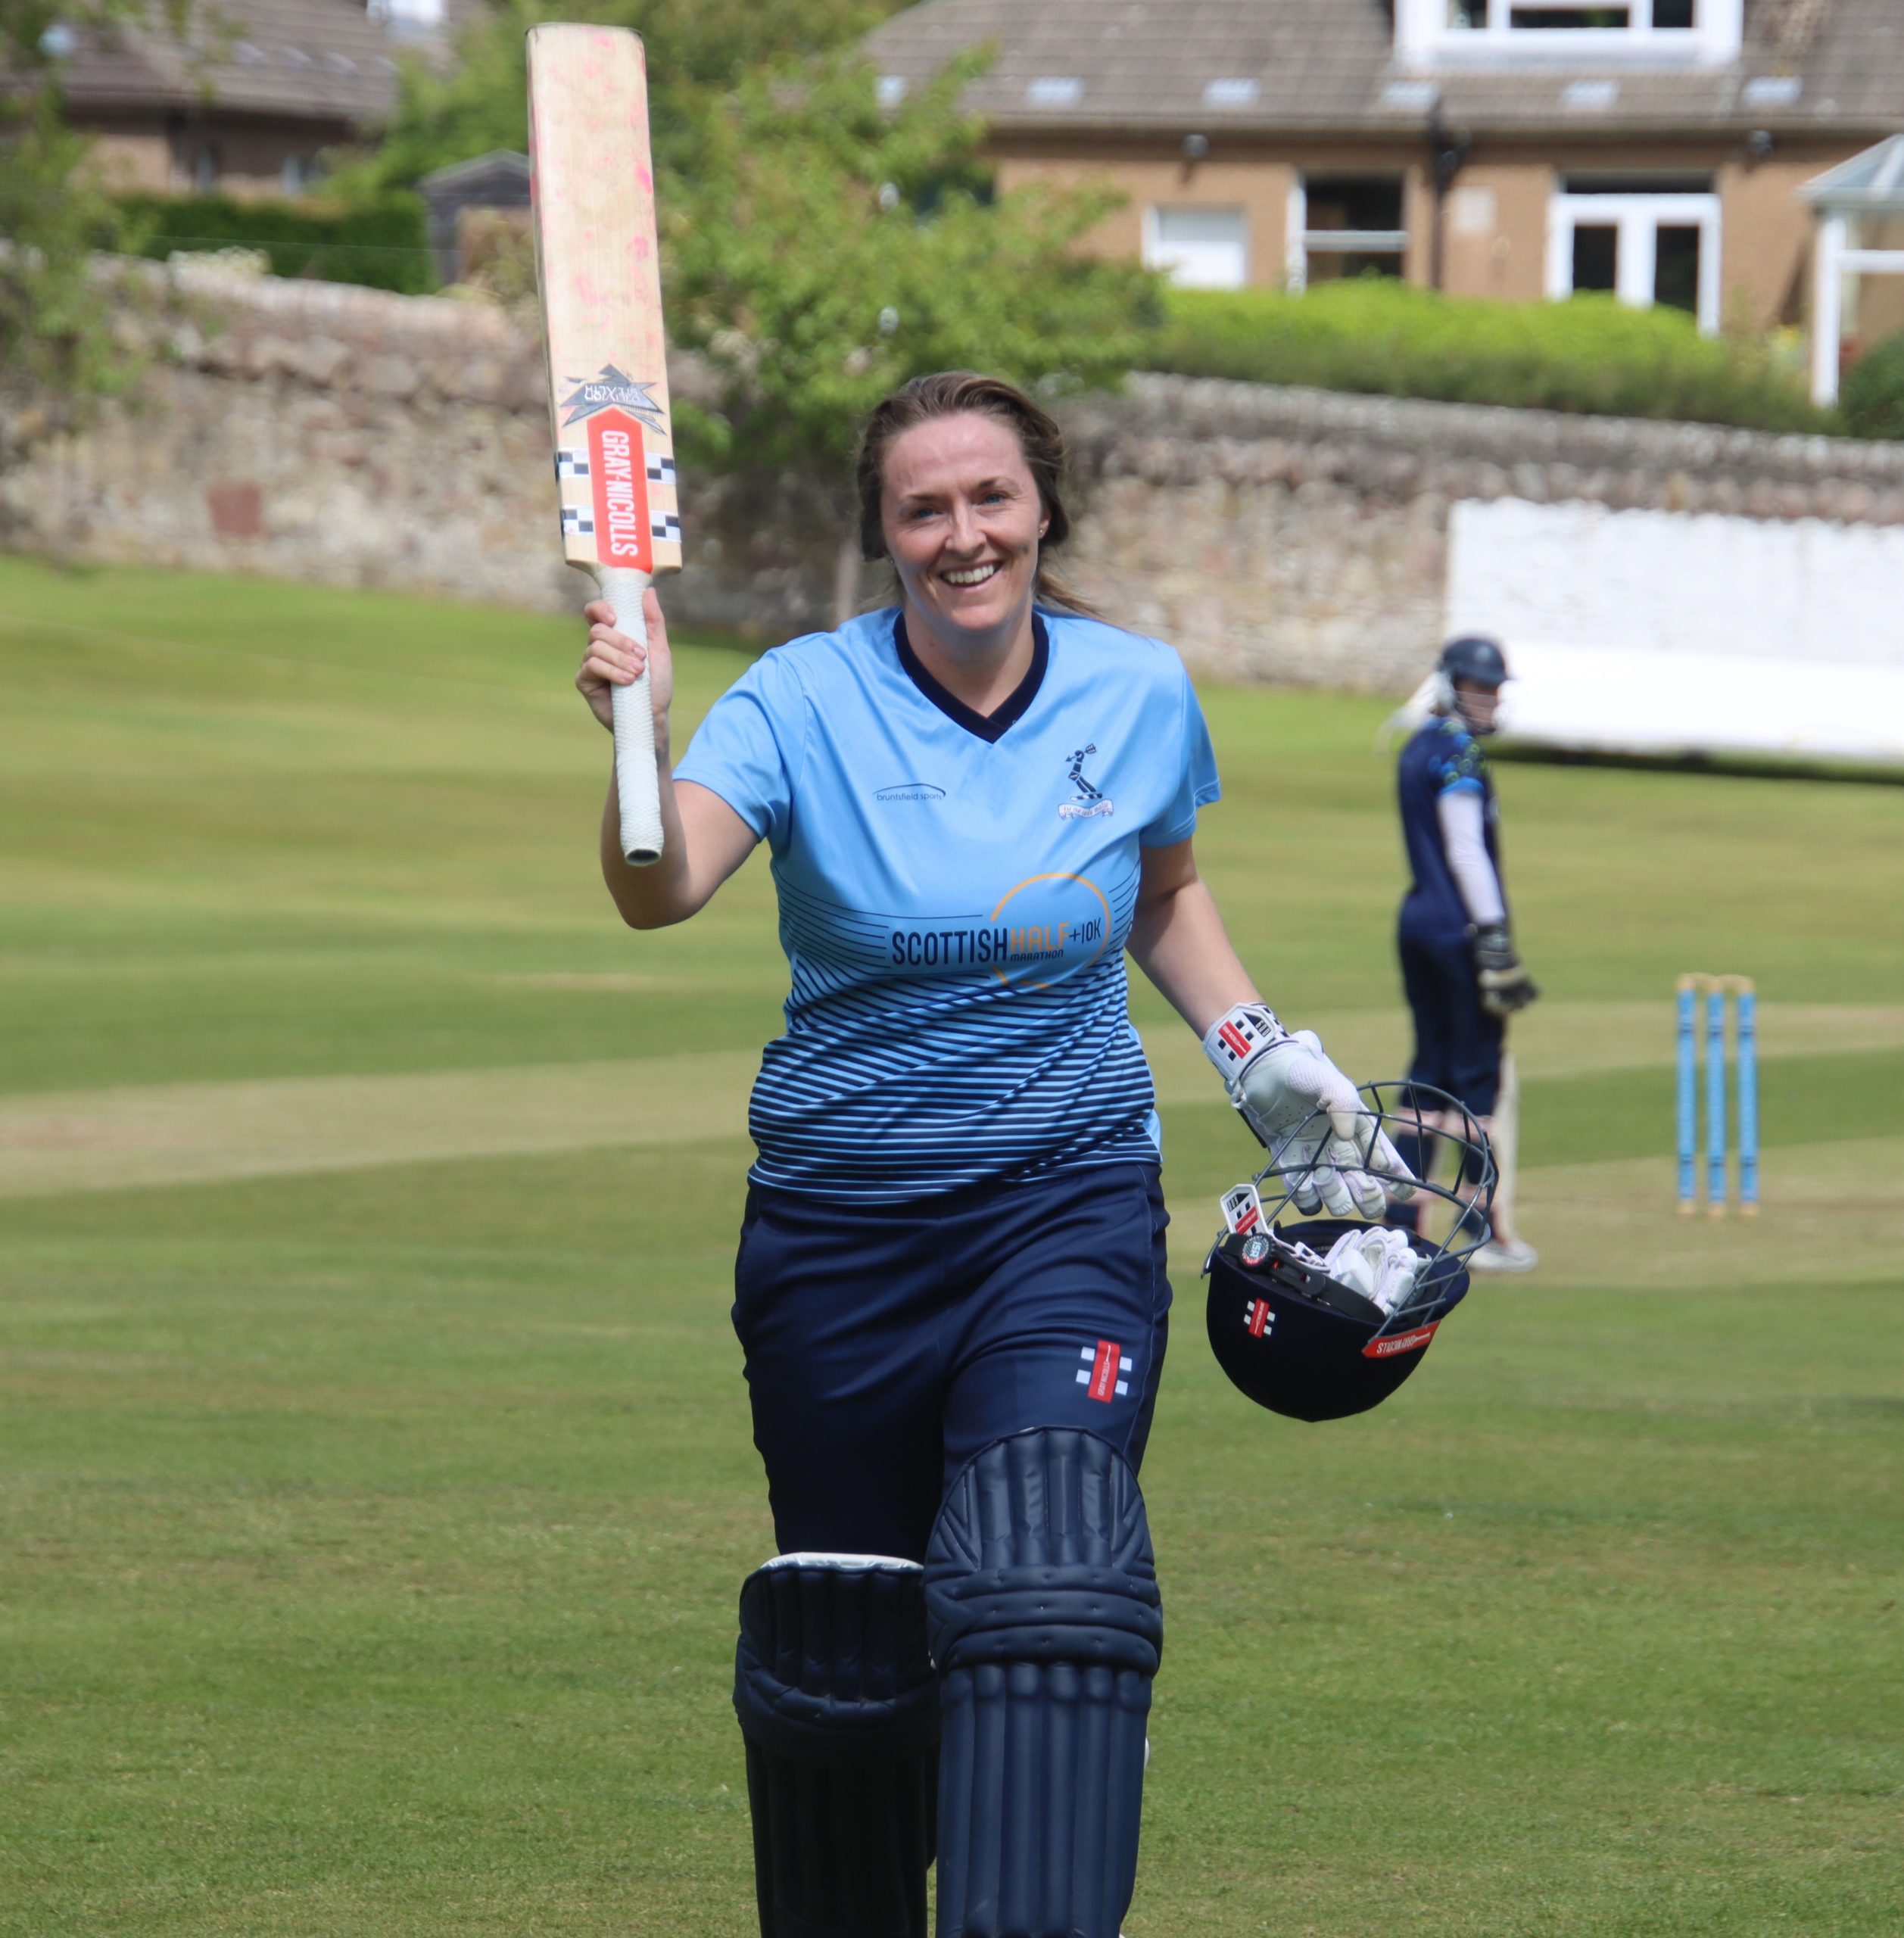 Women’s T20 finals day on Sunday